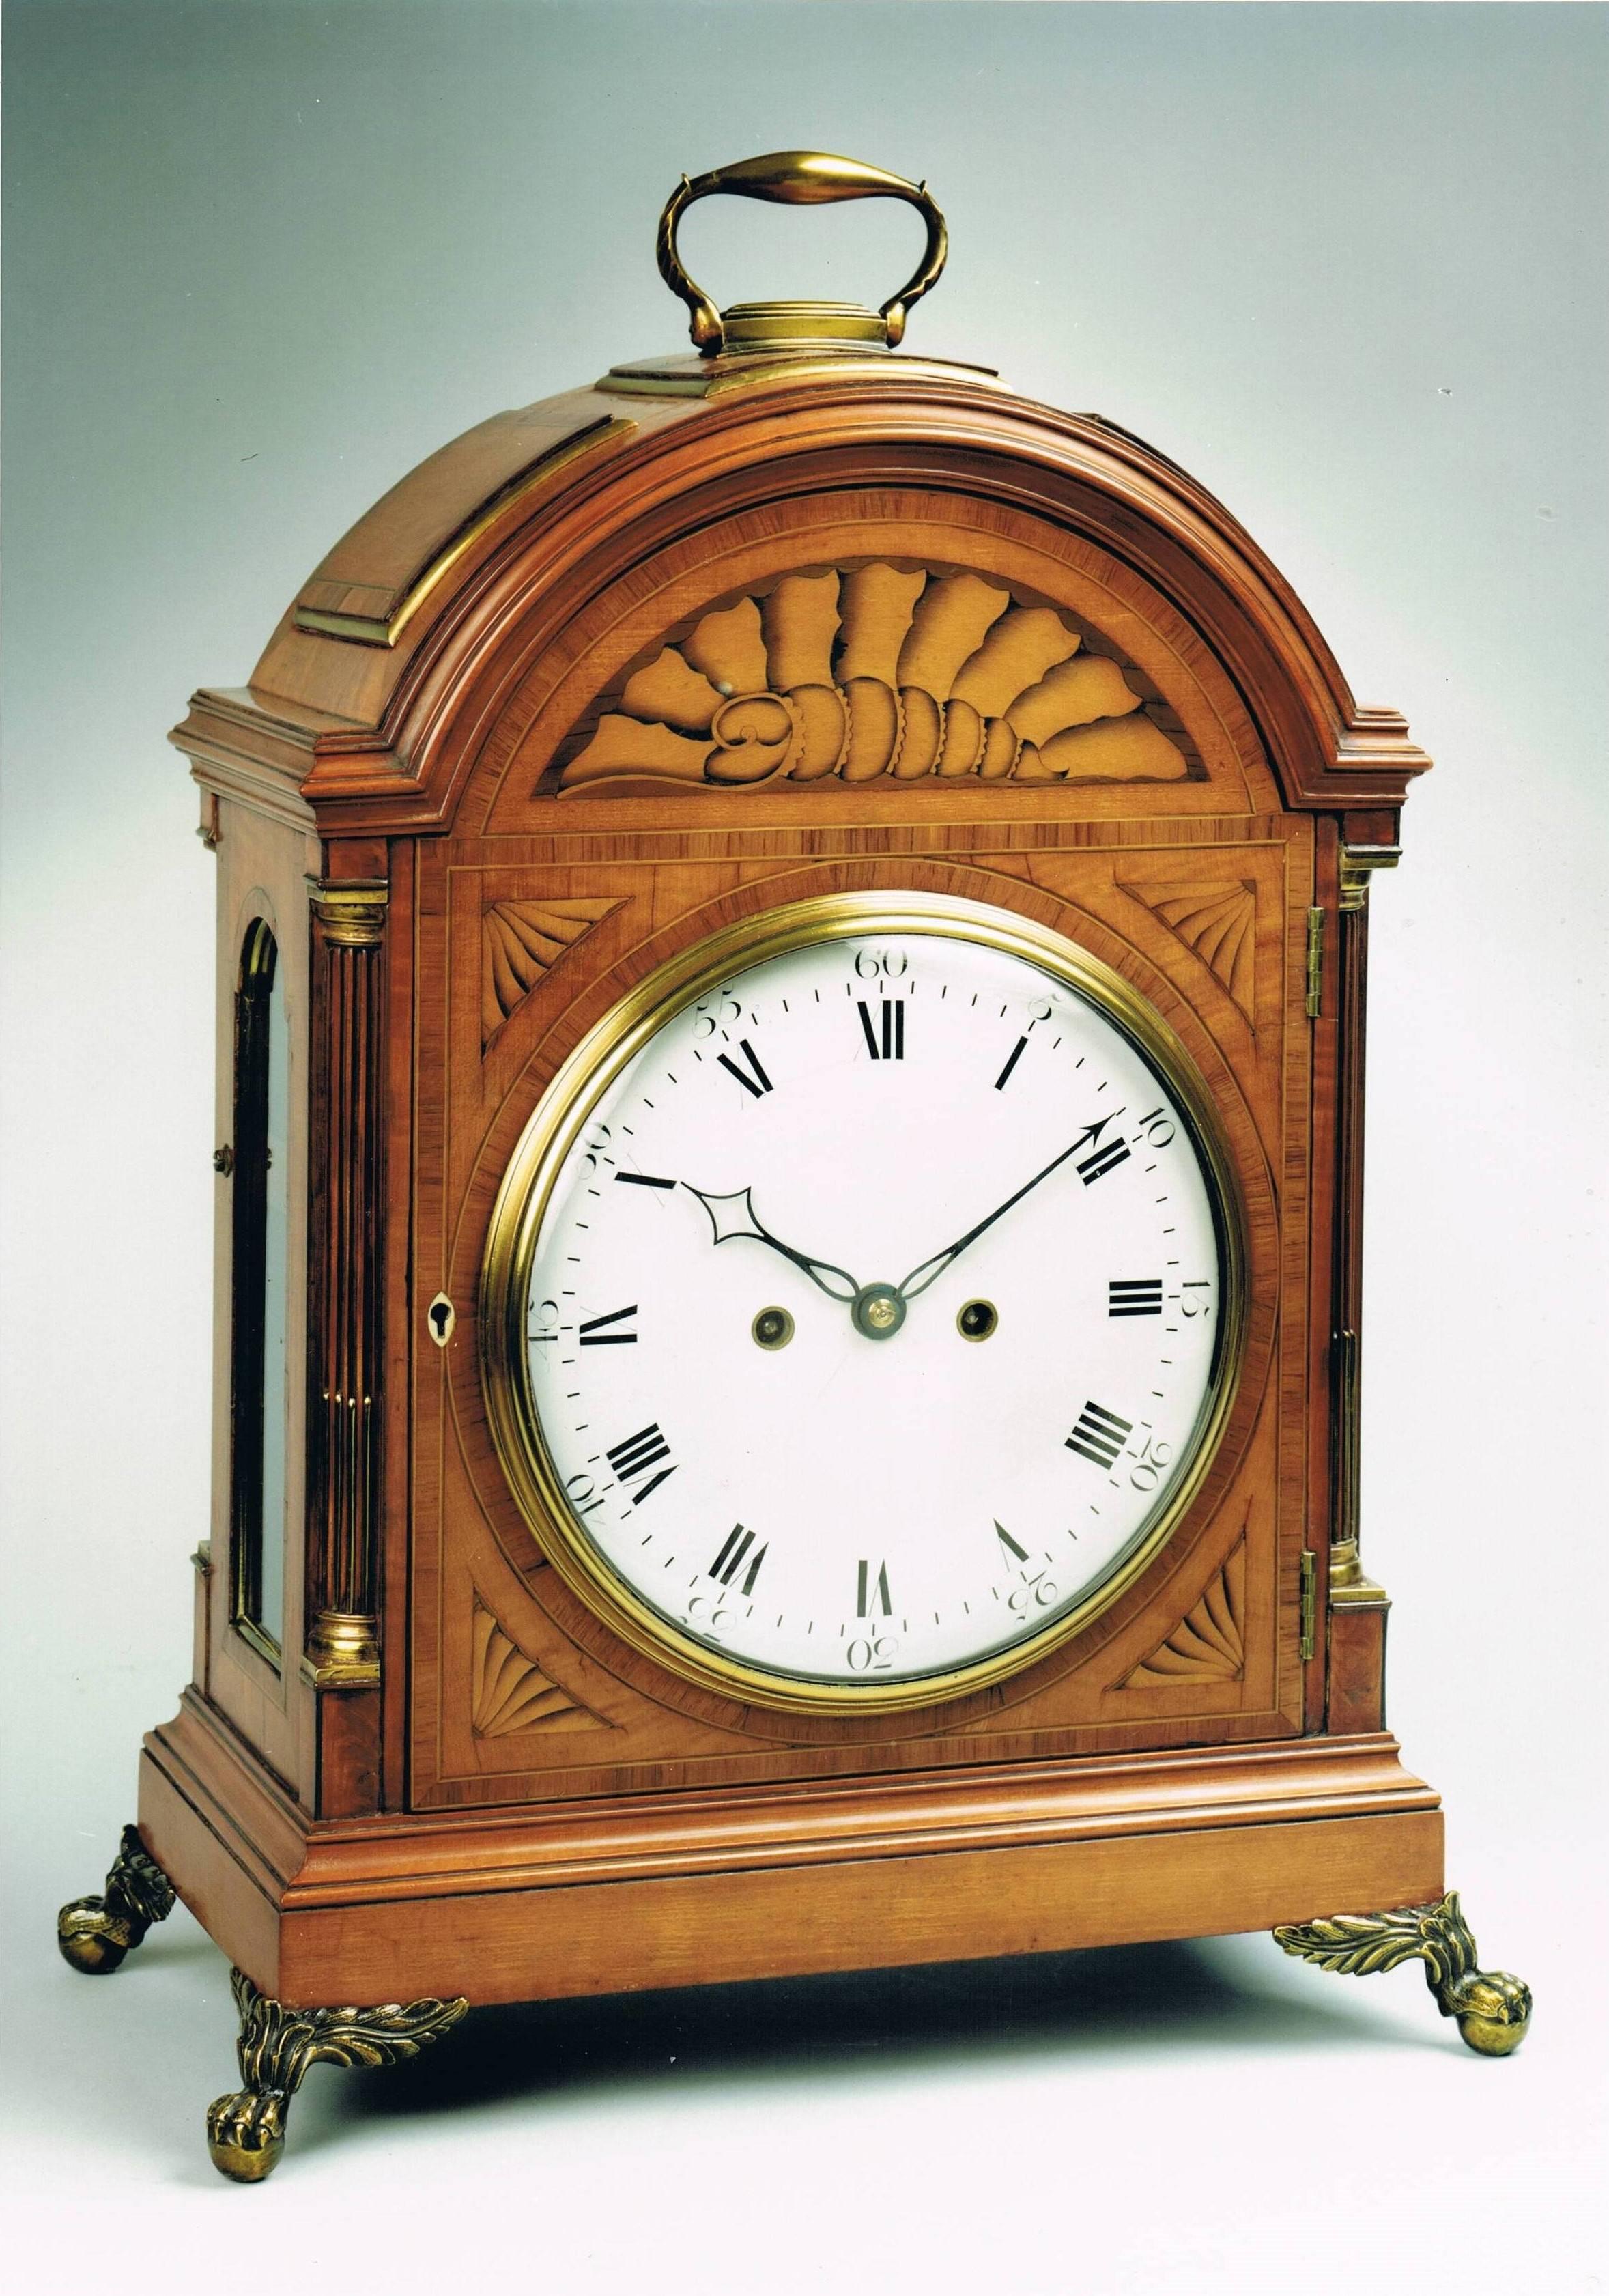 A fine and rare late 18th century George III period satinwood bracket clock of unusually large proportions, by Thomas Wright of Poultry in London, who was 'Watch-maker to the King.'

The arch top with a brass ring handle, with raised panels banded